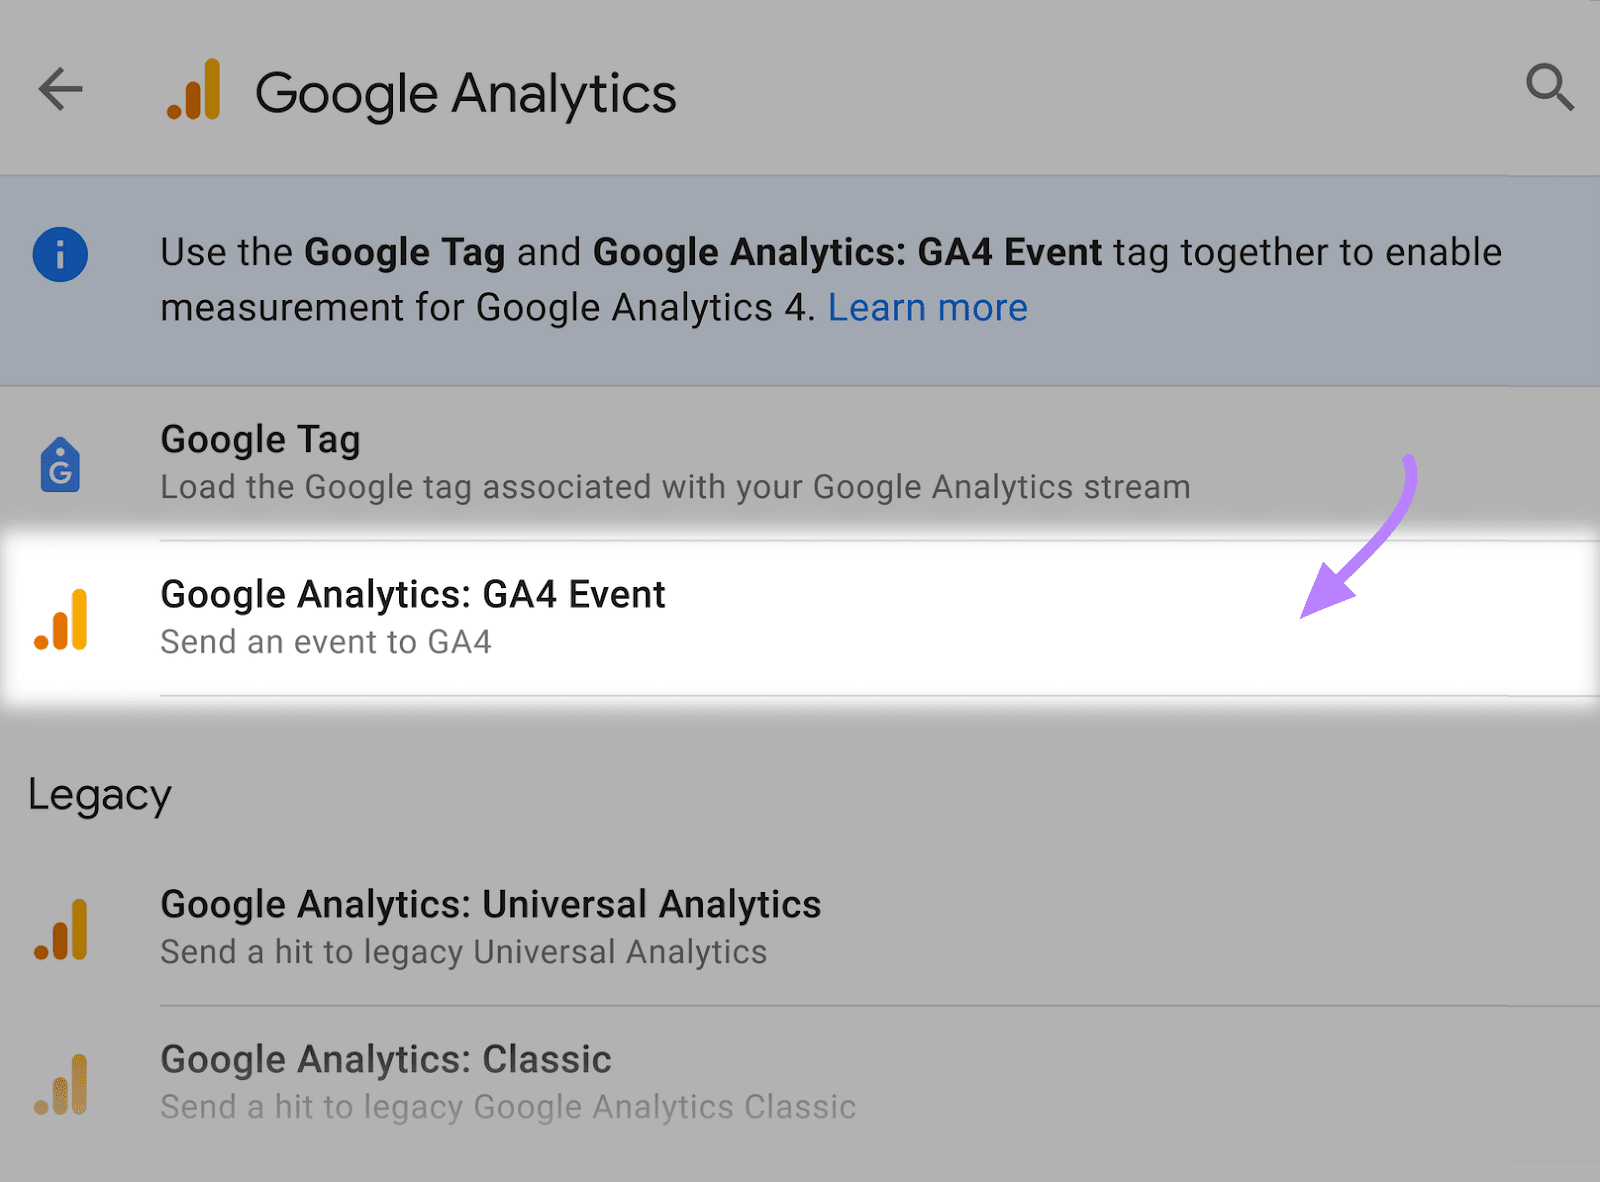  GA4 Event” selected from the database  nether  "Google Analytics"